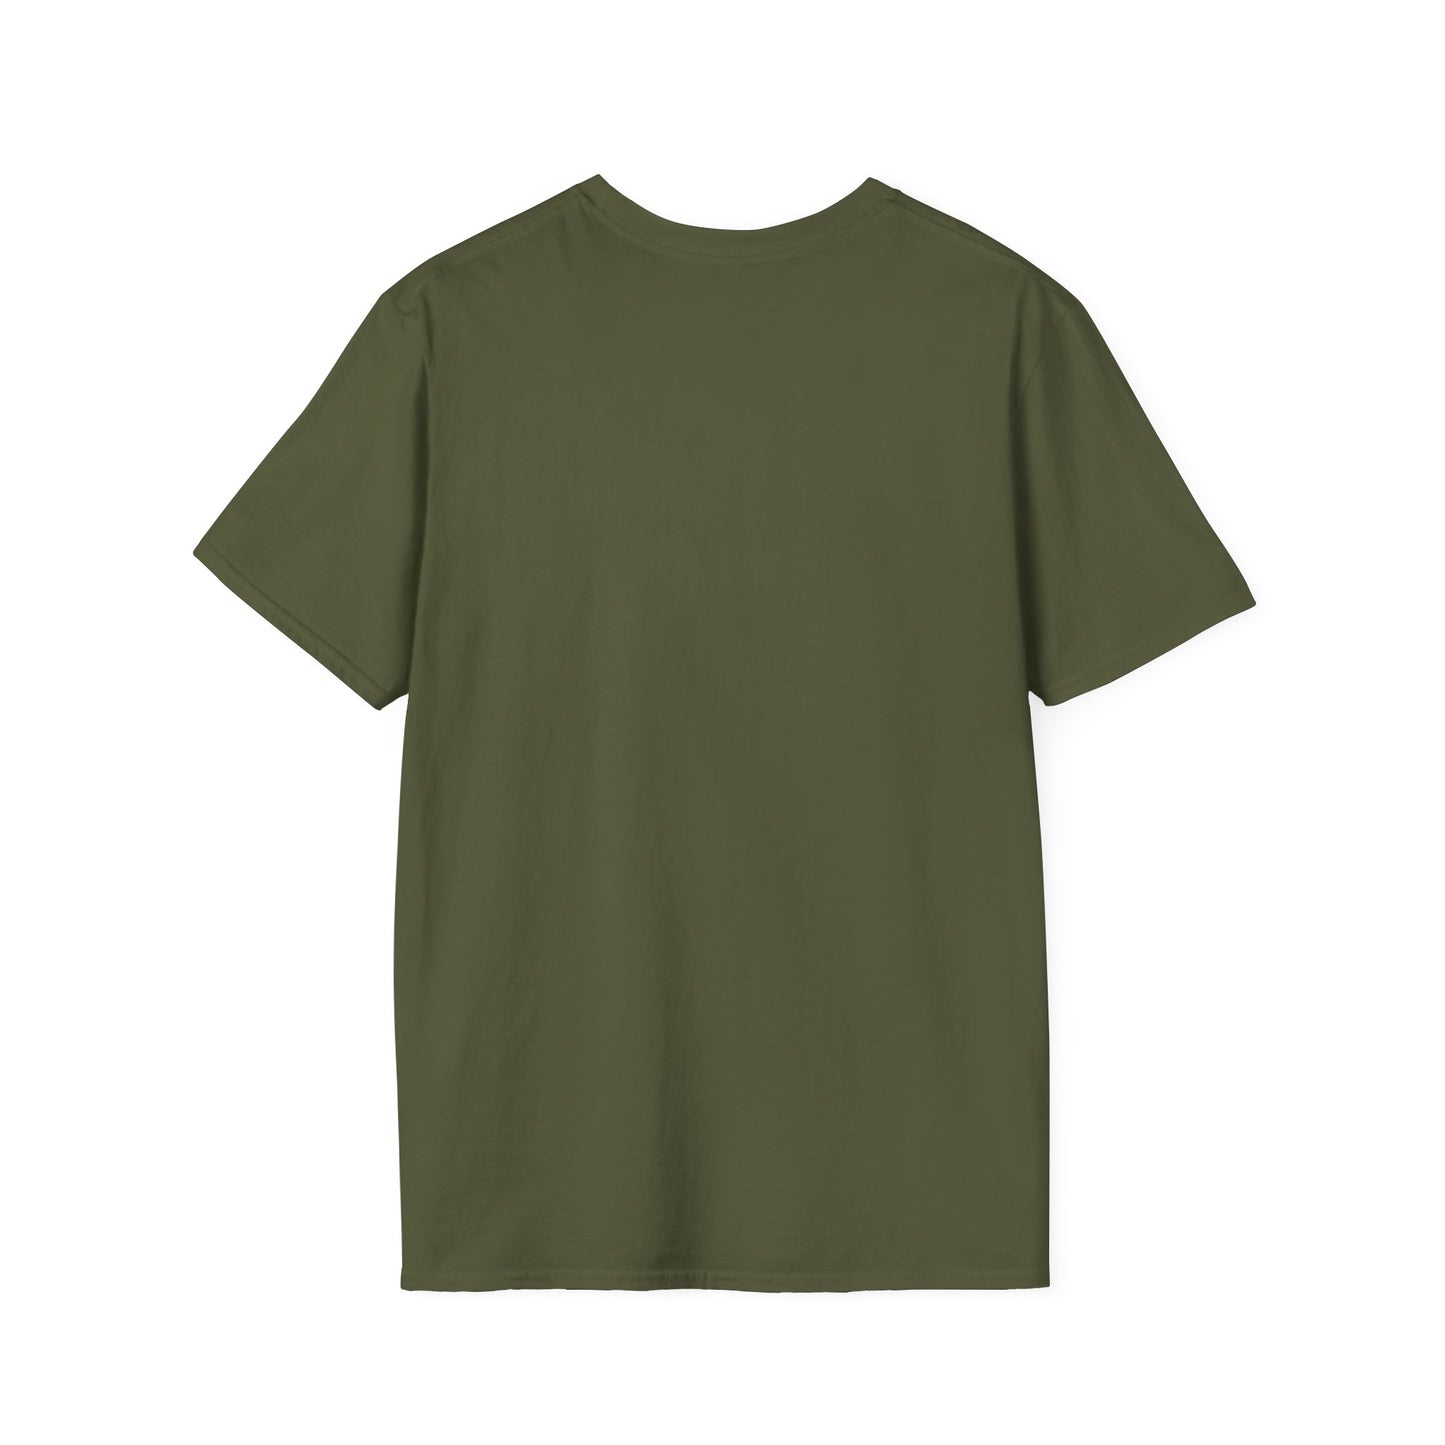 RB2podcast Army T-Shirt